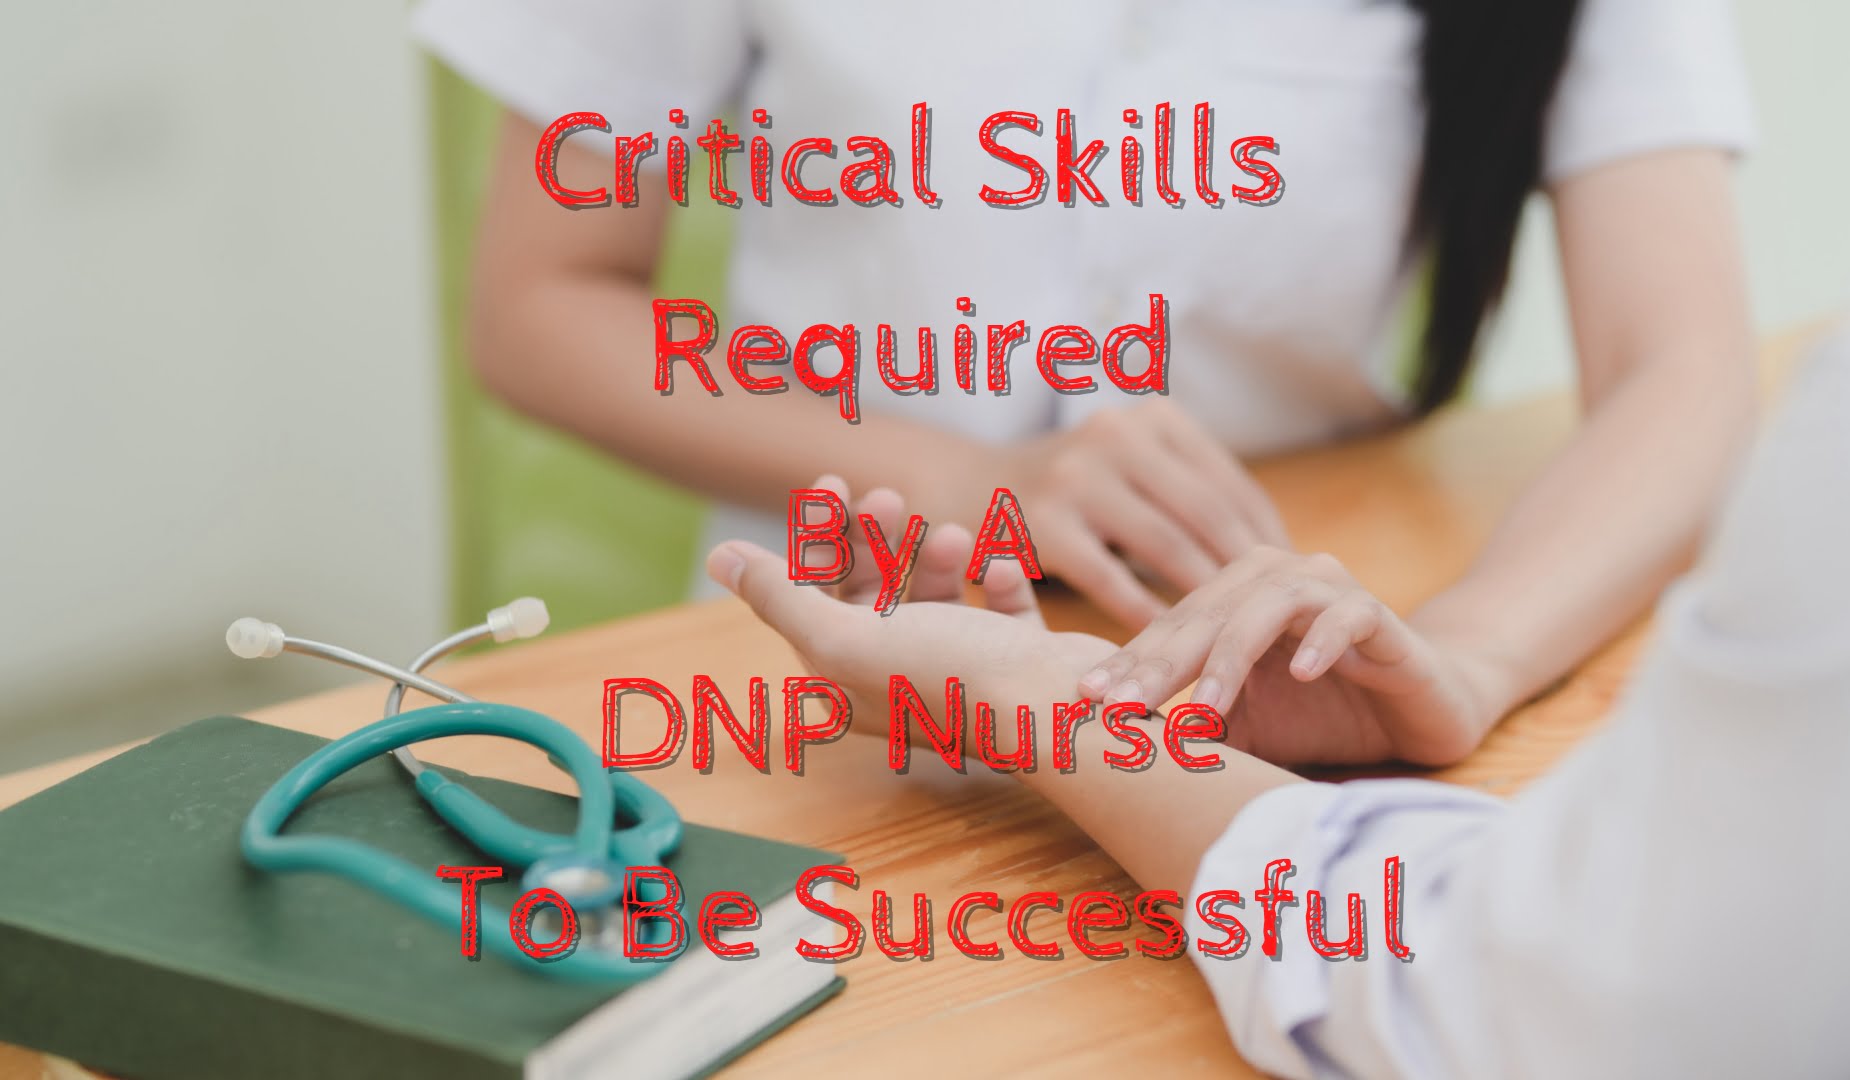 Critical Skills Required by a DNP Nurse to Be Successful